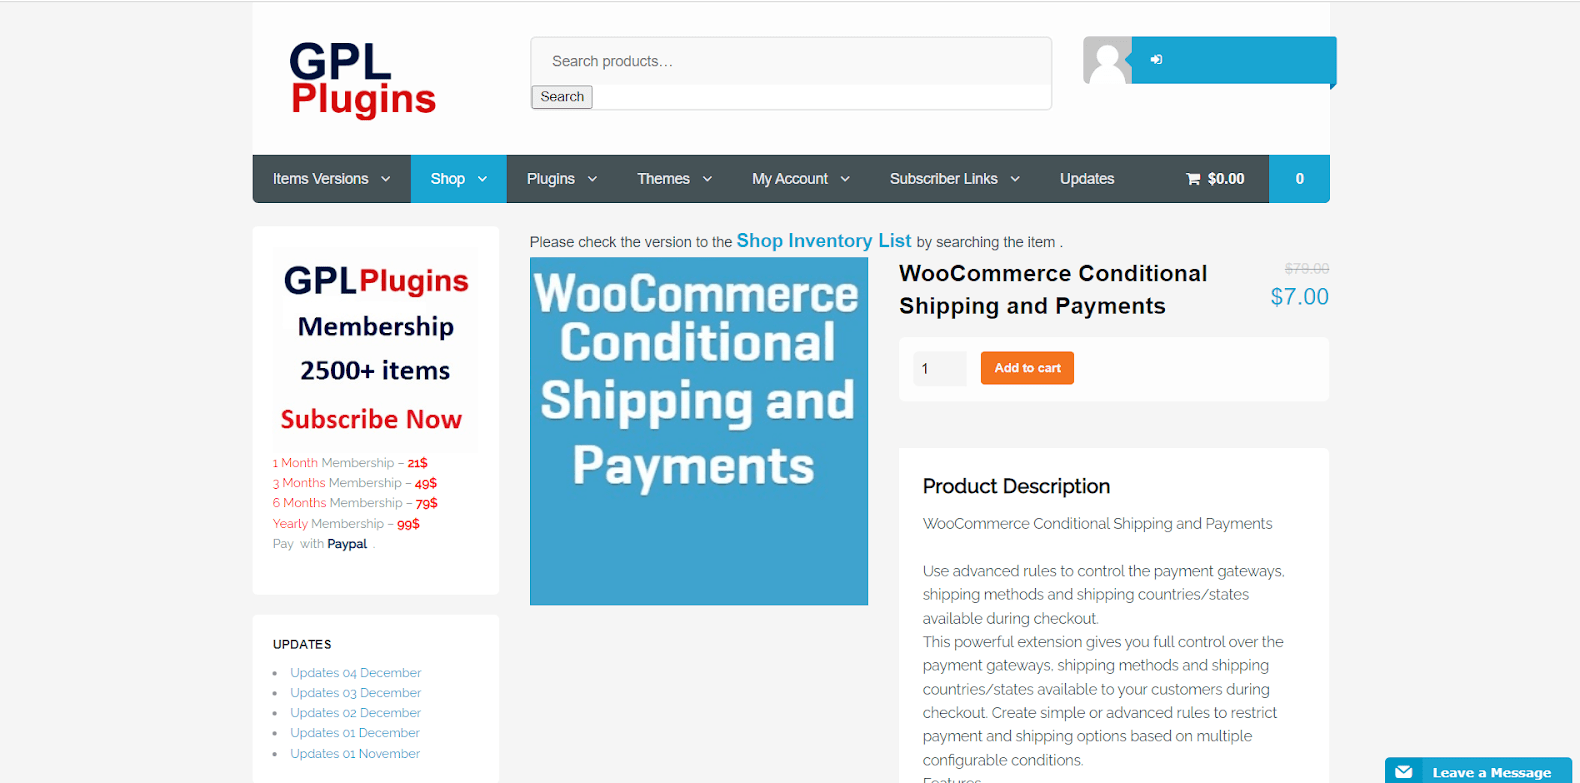 WooCommerce Conditional Shipping and Payments by GPLPlugins